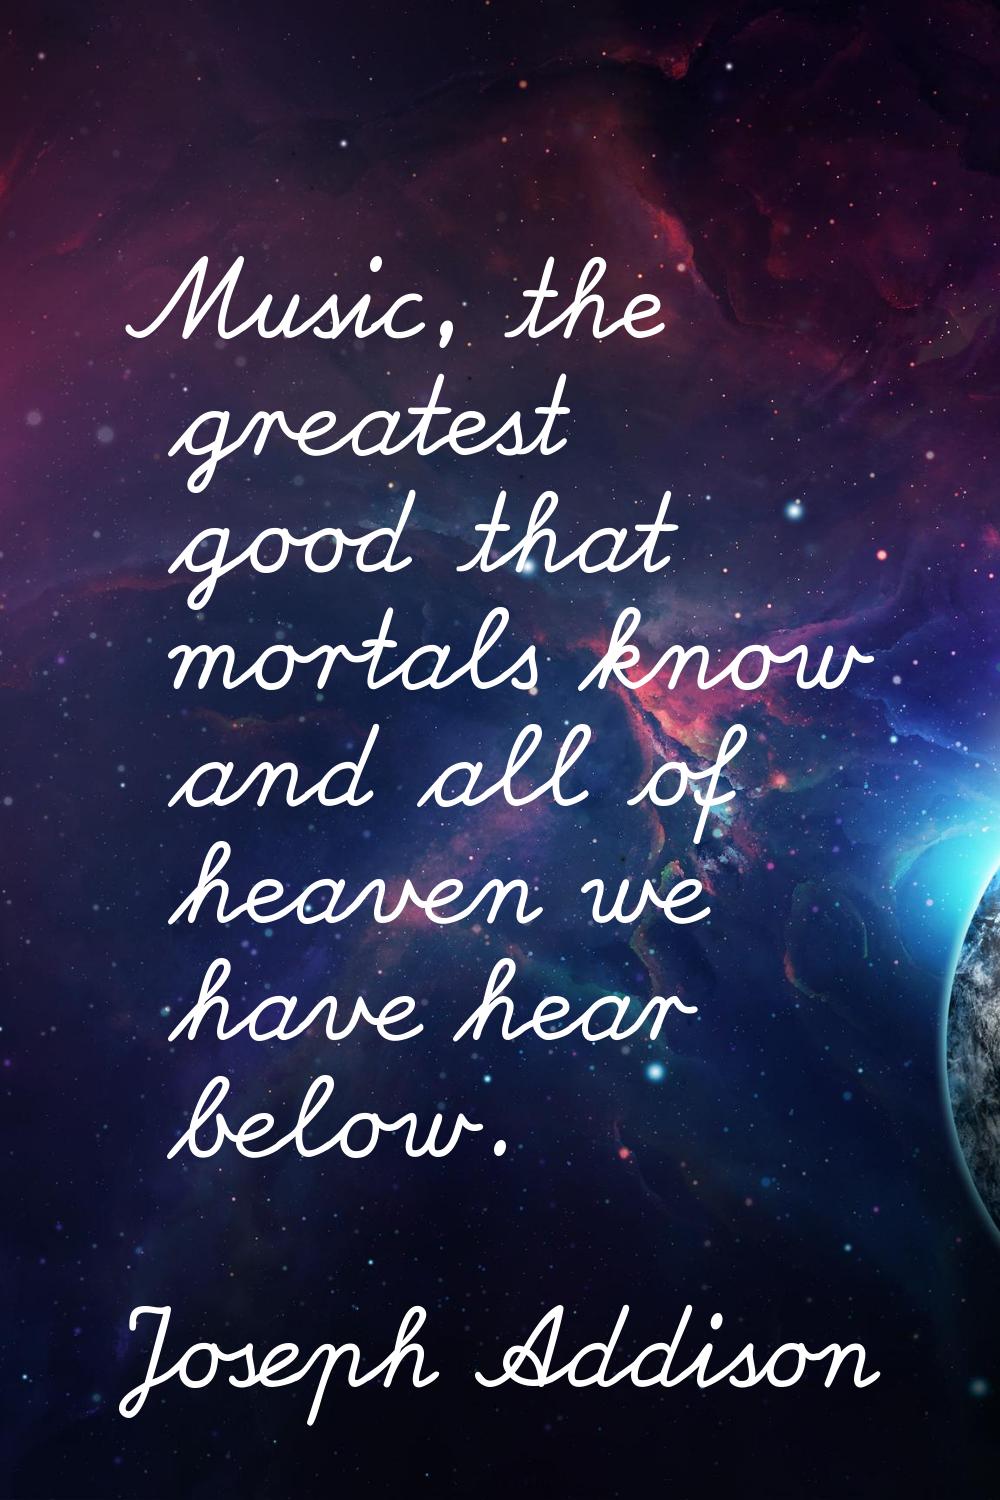 Music, the greatest good that mortals know and all of heaven we have hear below.